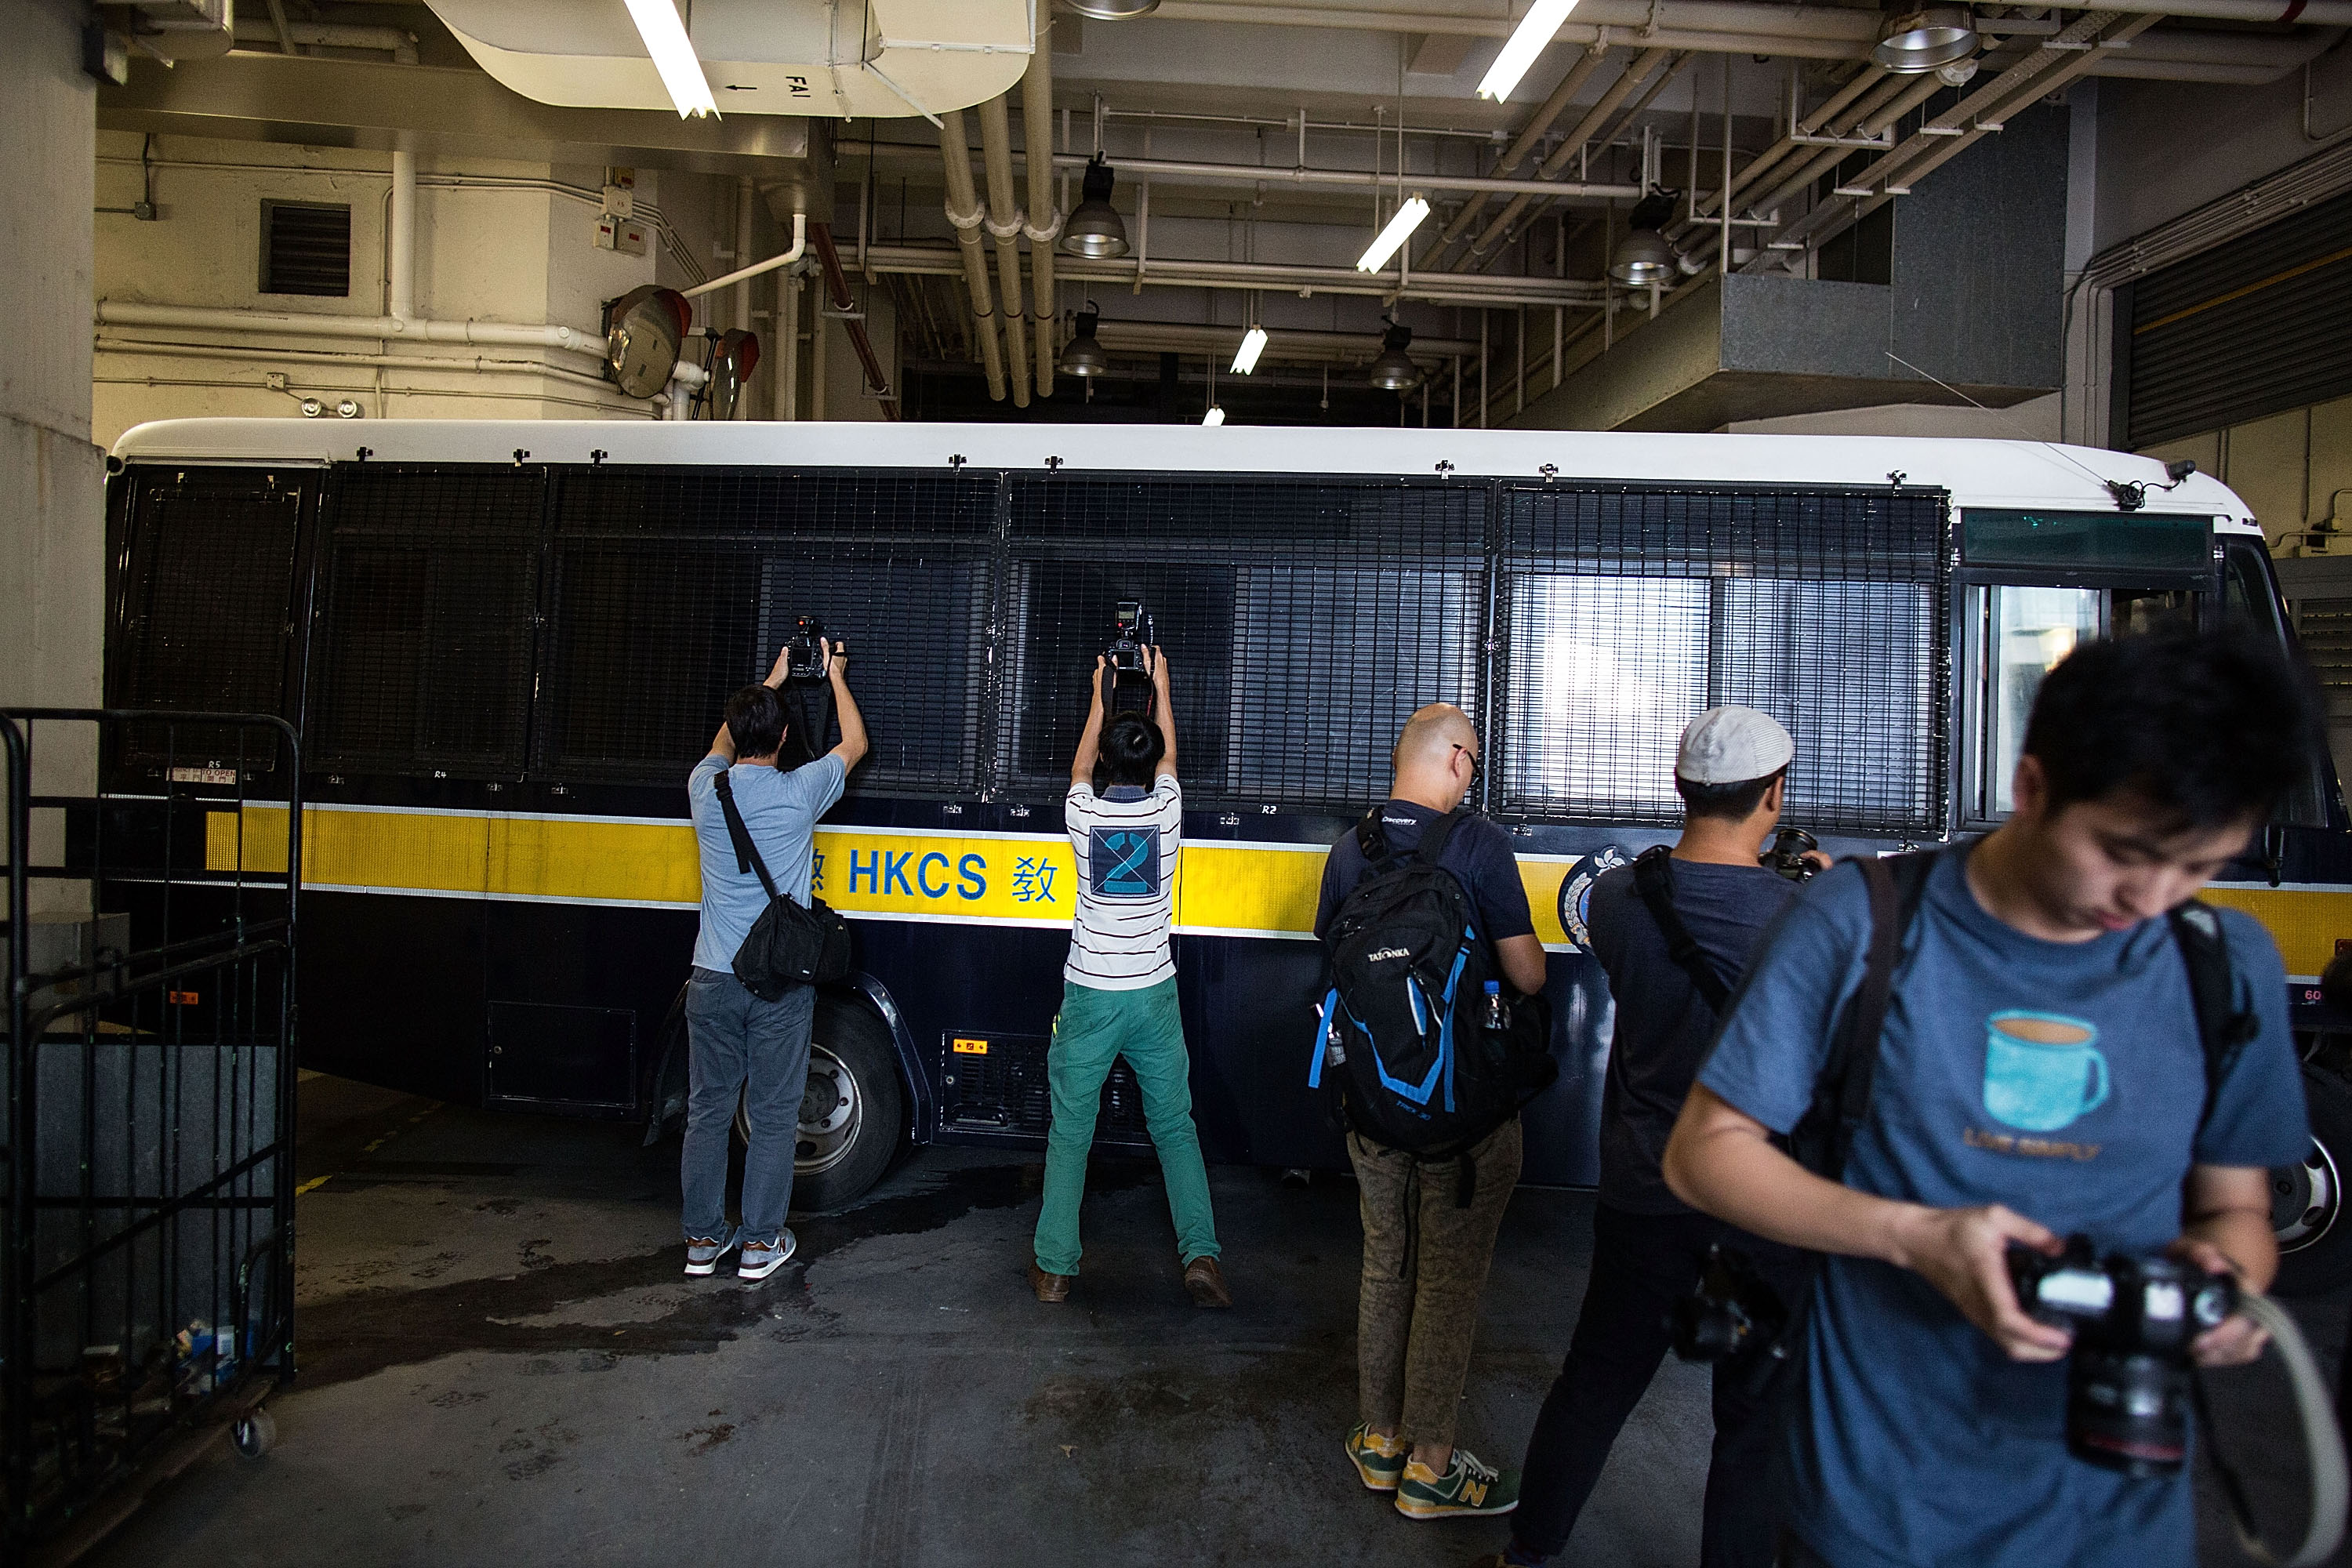 Journalists take photographs when a prison vehicle escorting Rurik Jutting leaves the High Court on Oct. 24, 2016, in Hong Kong (Lam Yik Fei—Getty Images)